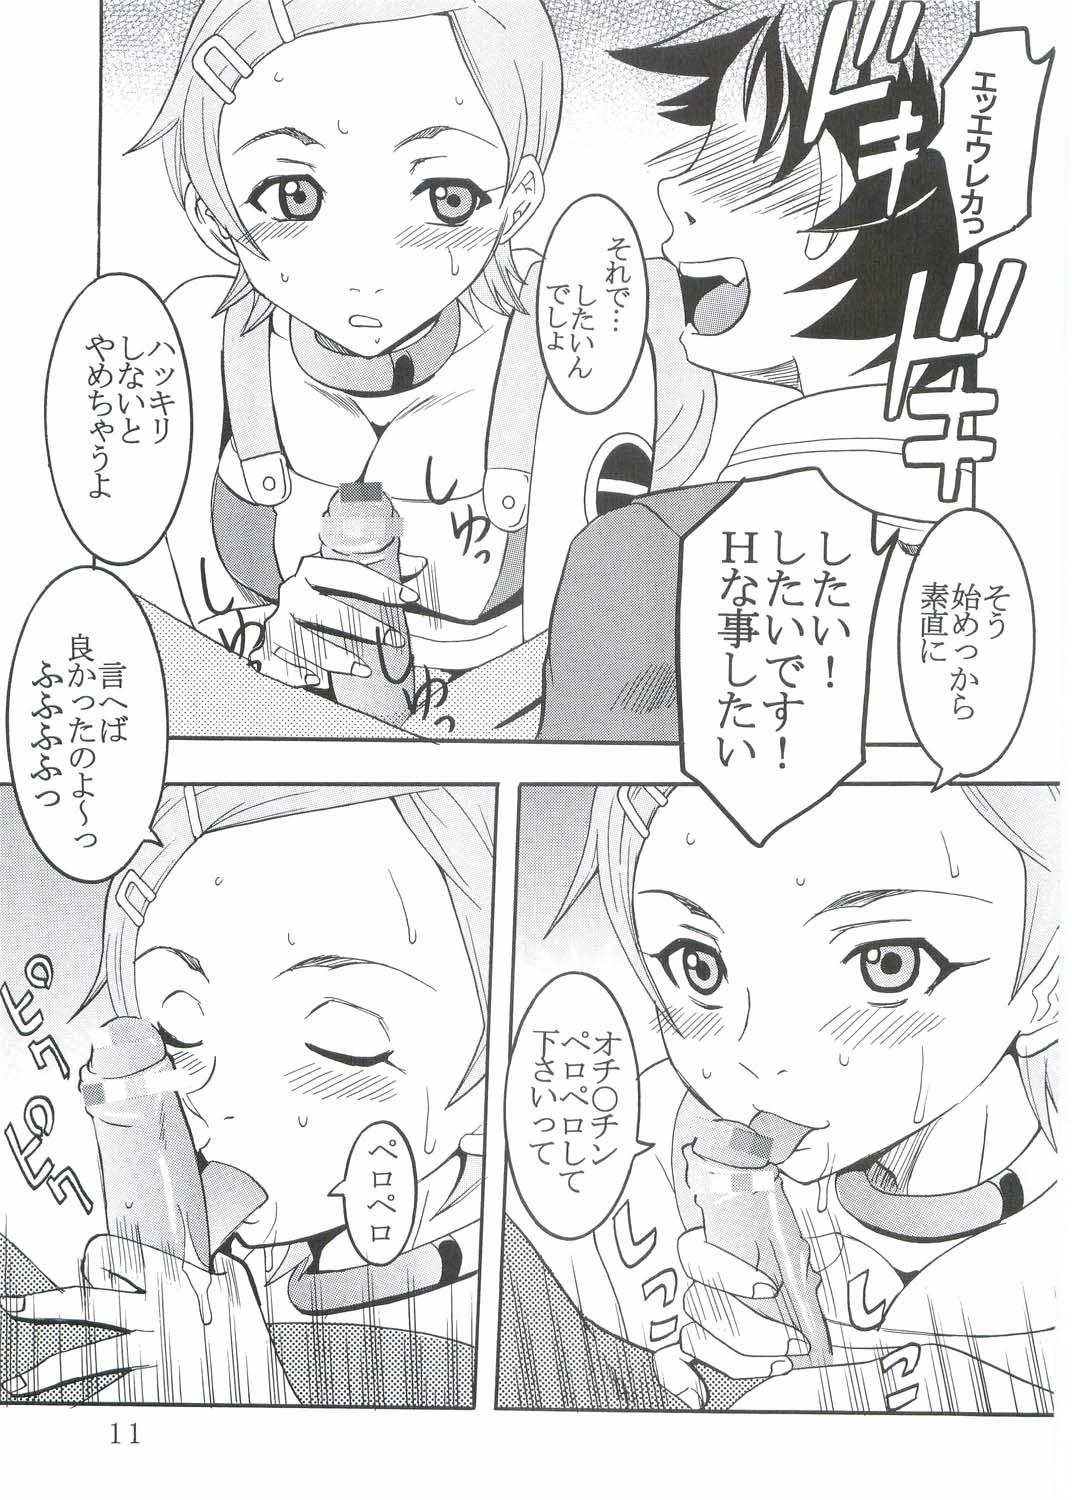 Finger Ura ray-out - Eureka 7 Lolicon - Page 12